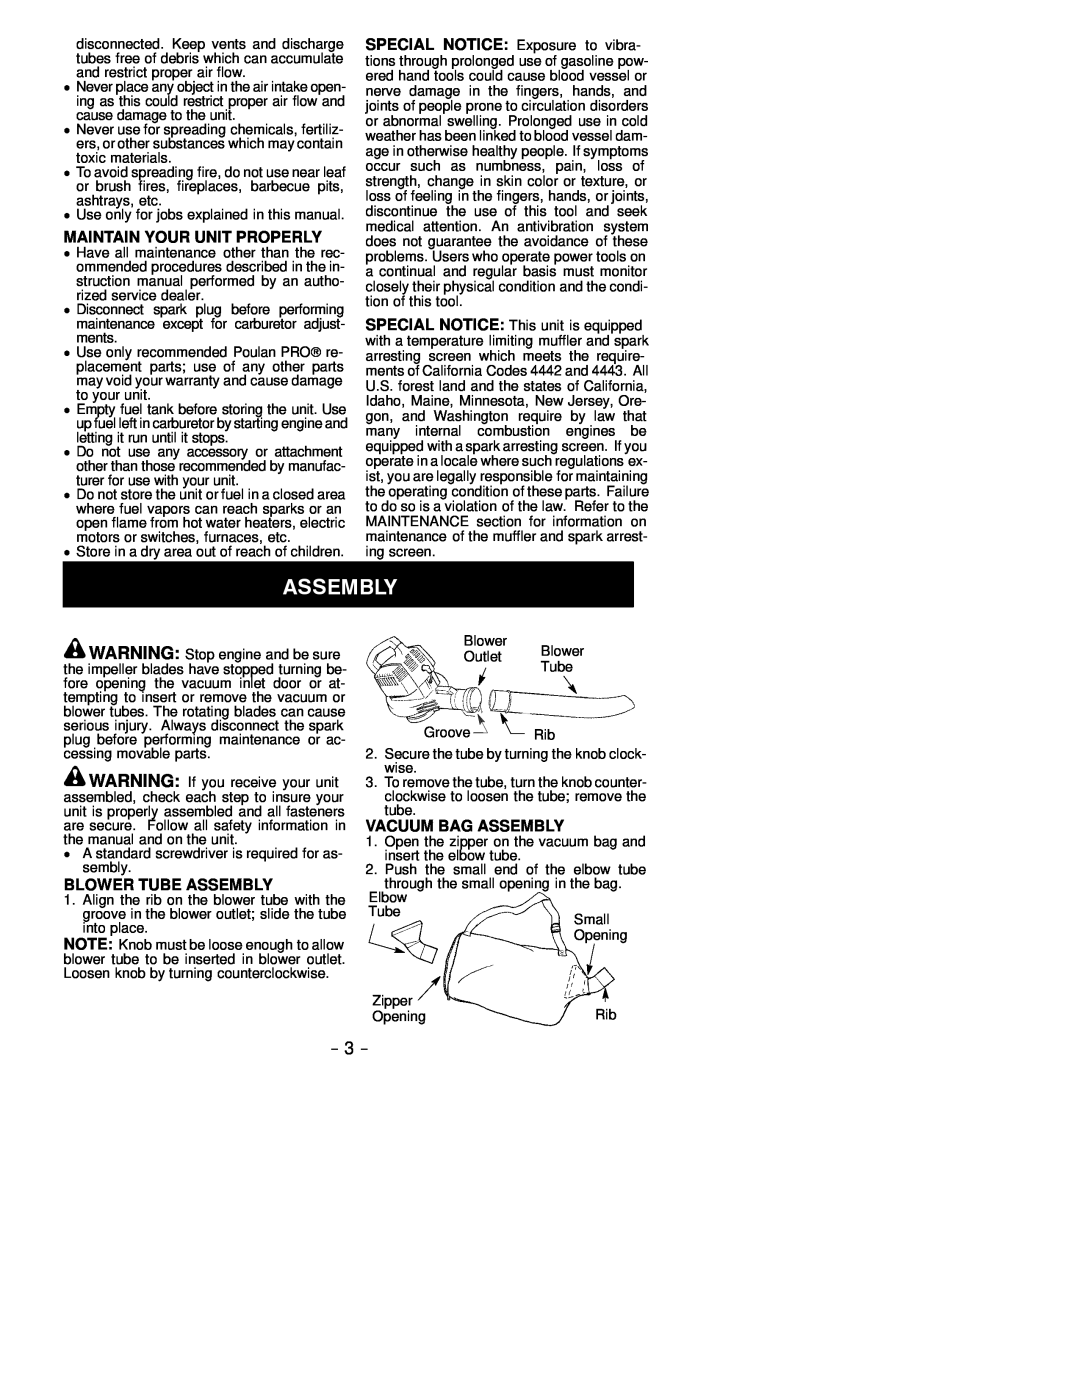 Poulan 530164283 instruction manual Maintain Your Unit Properly, Blower Tube Assembly, Vacuum Bag Assembly 